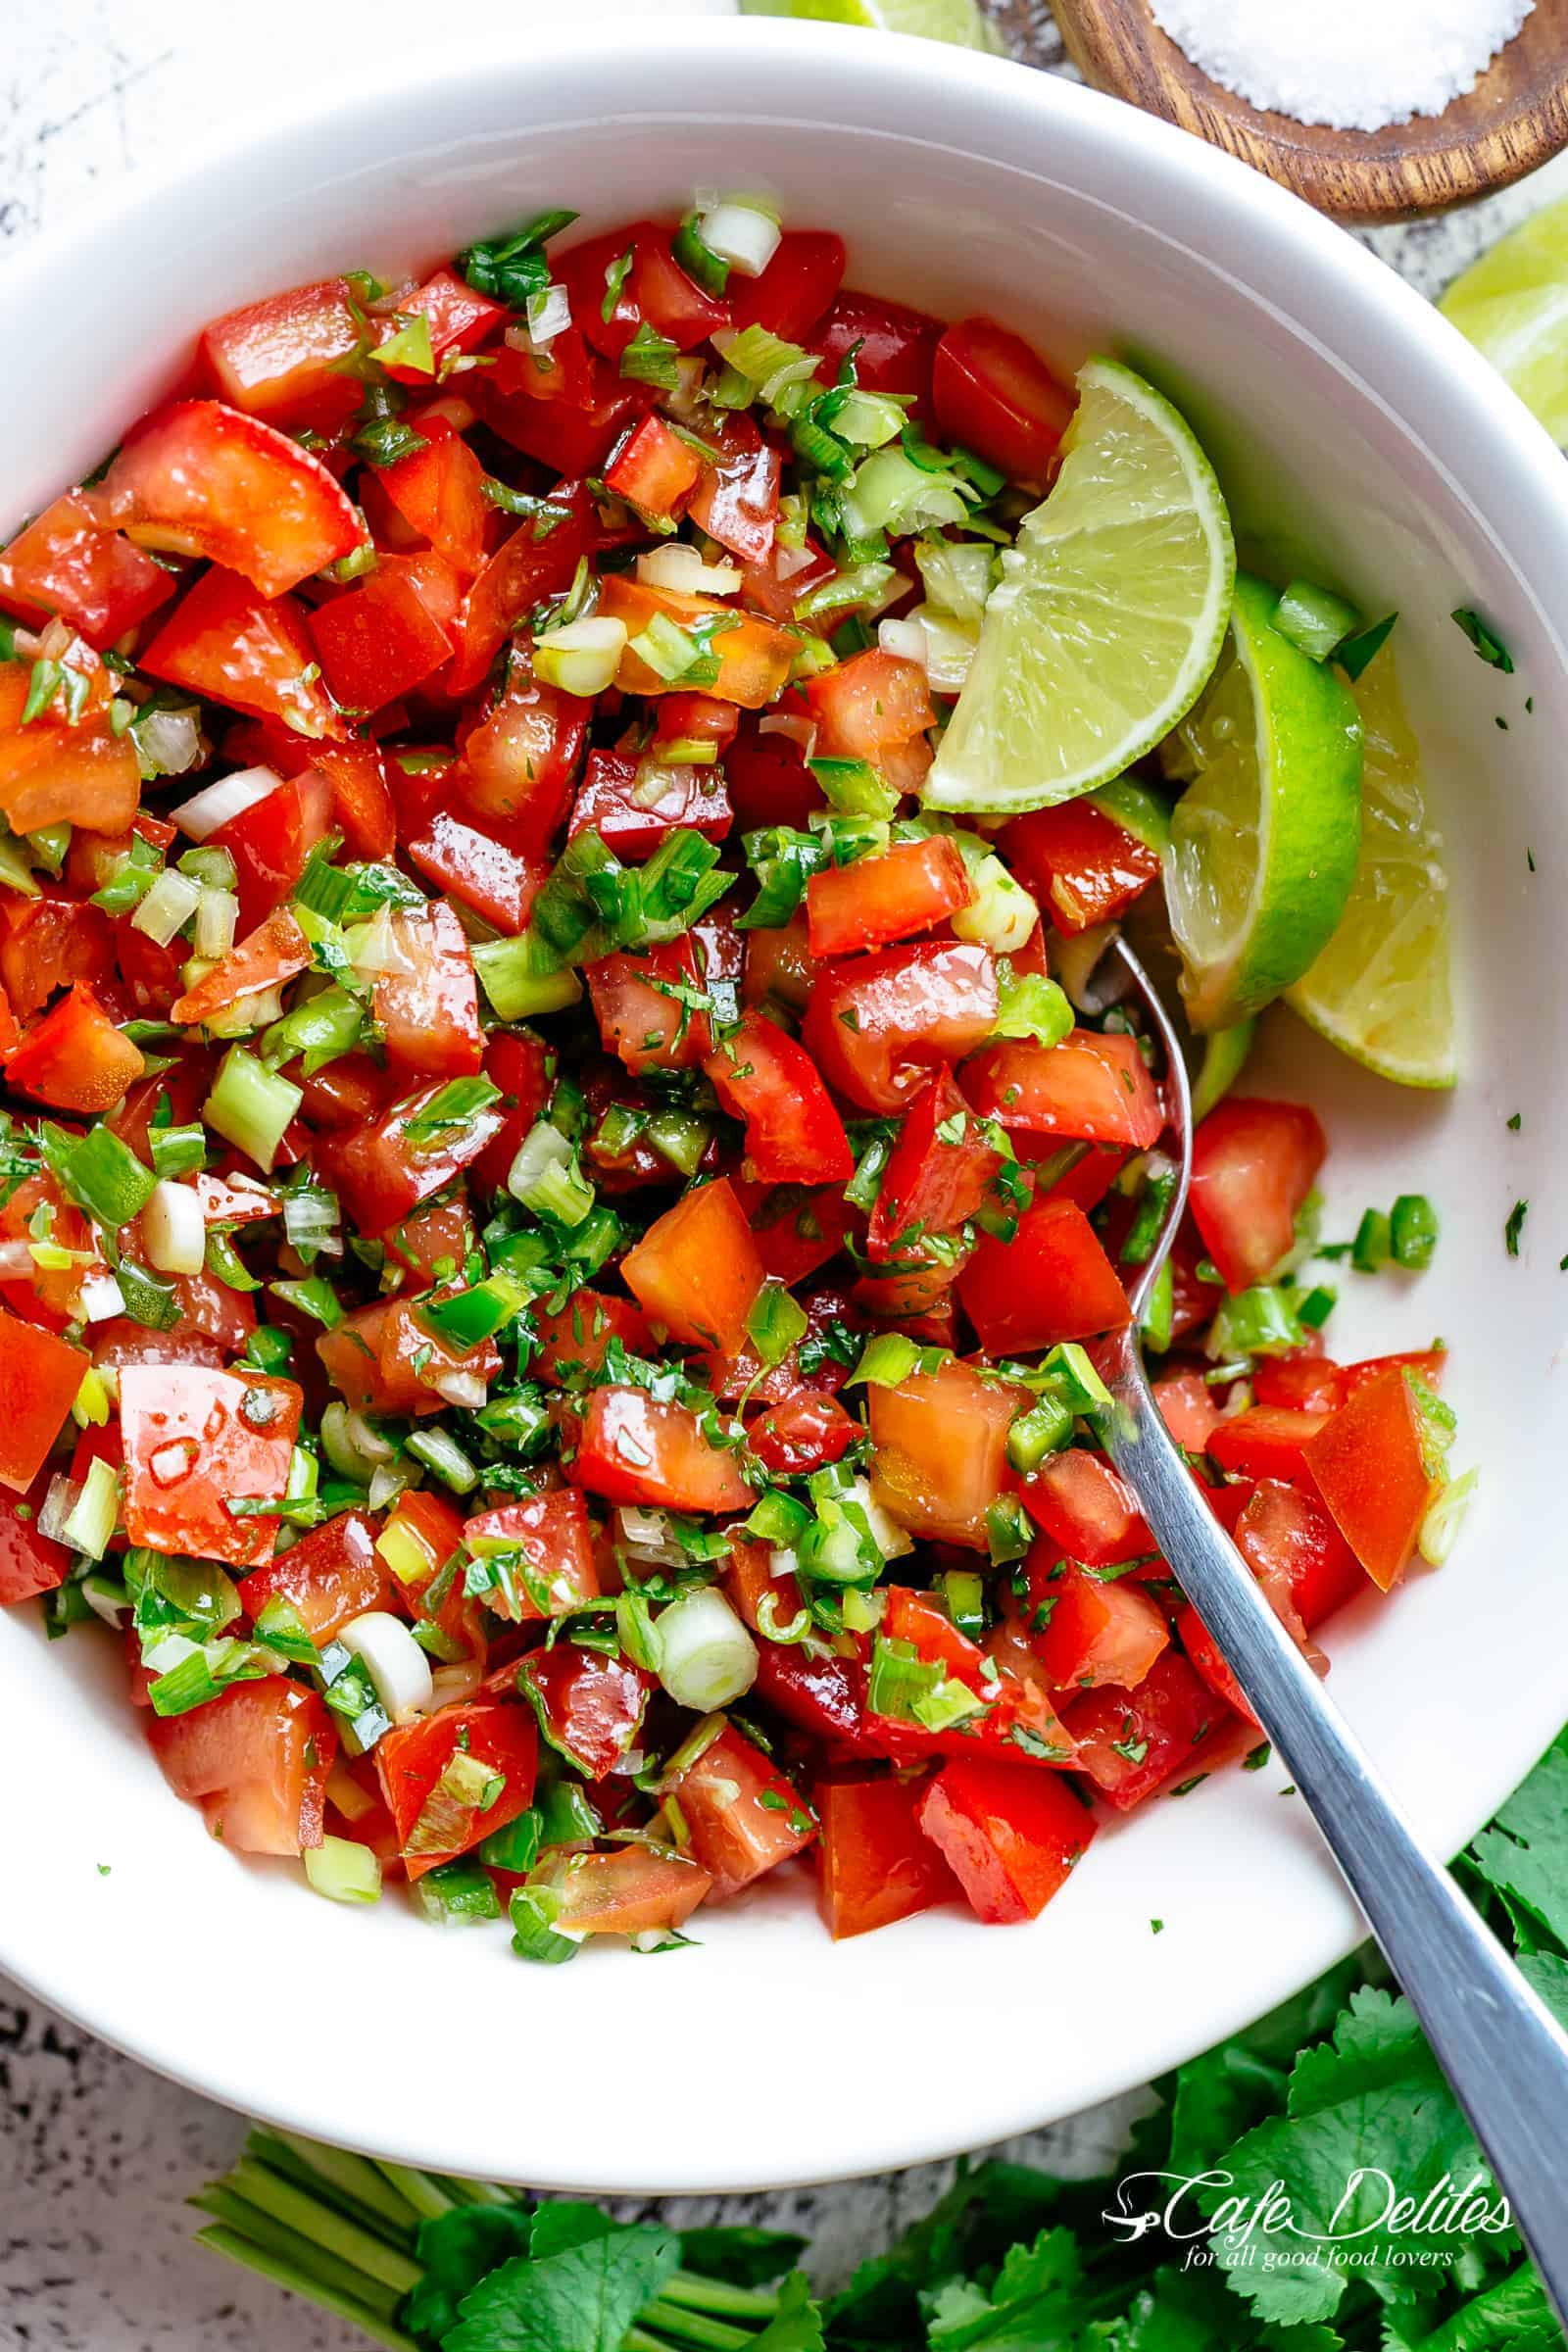 Pico De Gallo is a super easy to make fresh tomato salsa you can serve with anything! From tortilla chips to tacos, enchiladas or Carne Asada! With a handful of ingredients, this Pico De Gallo is the perfect accompaniment! | cafedelites.com